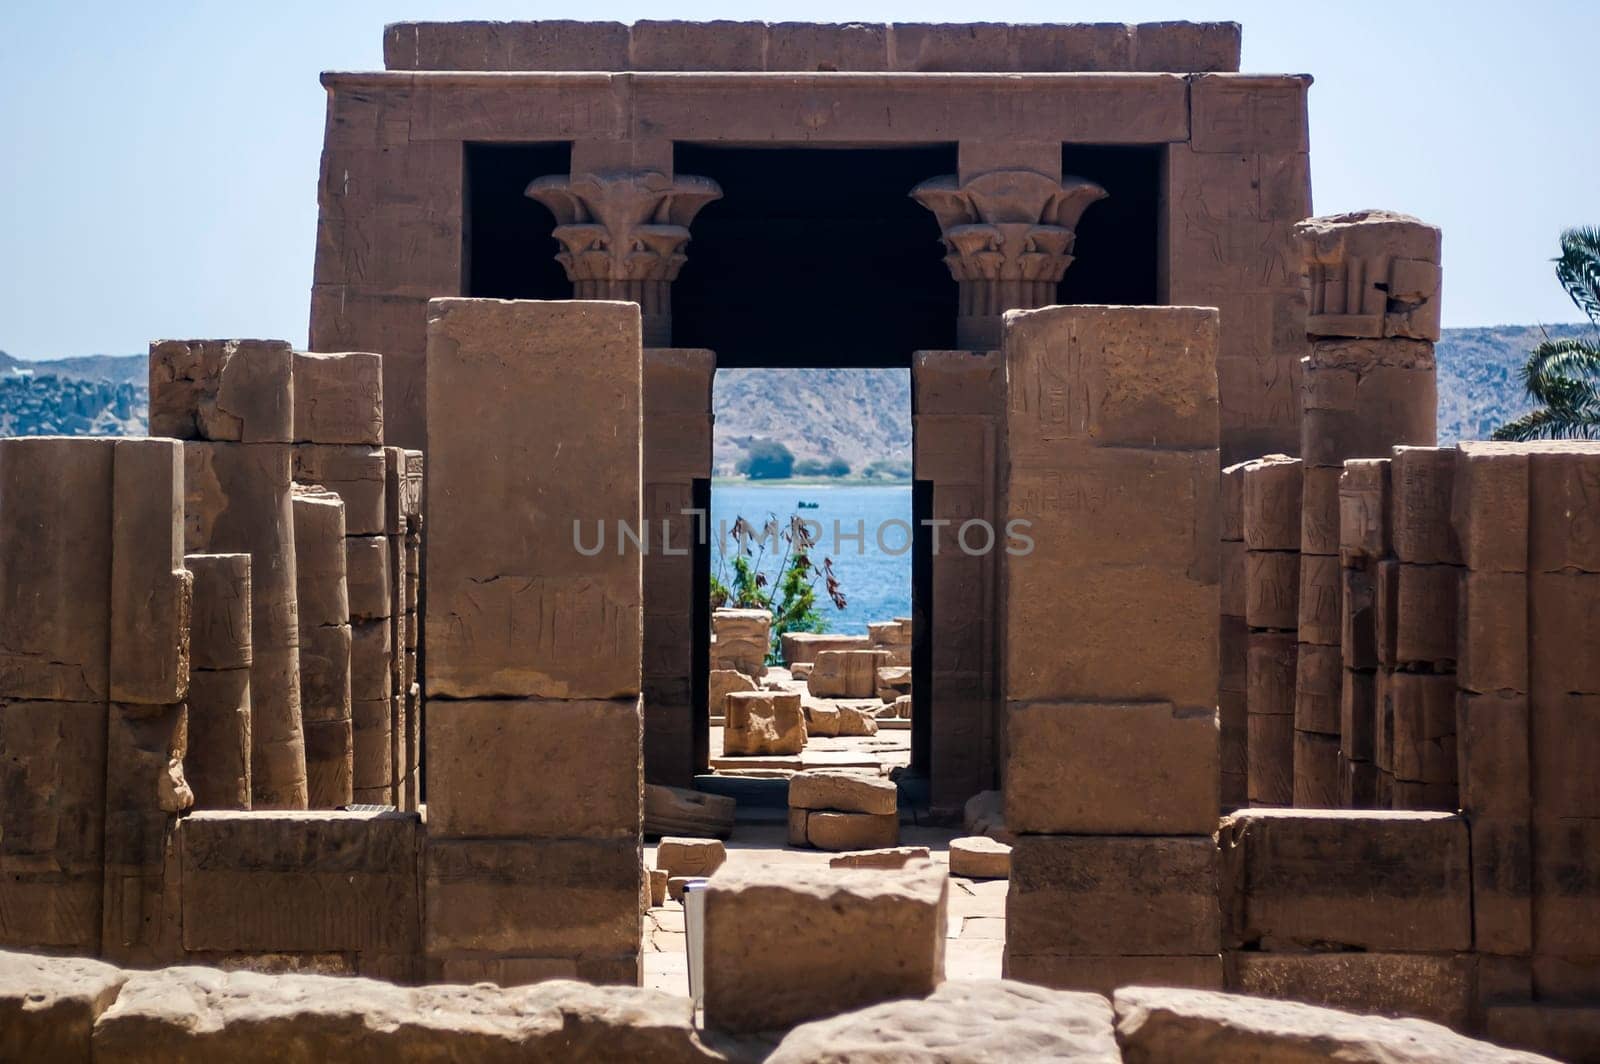 Aswan, Egypt - April 17 2008: The temple of Isis at Philae near the Aswan dam on the Nile. Egypt